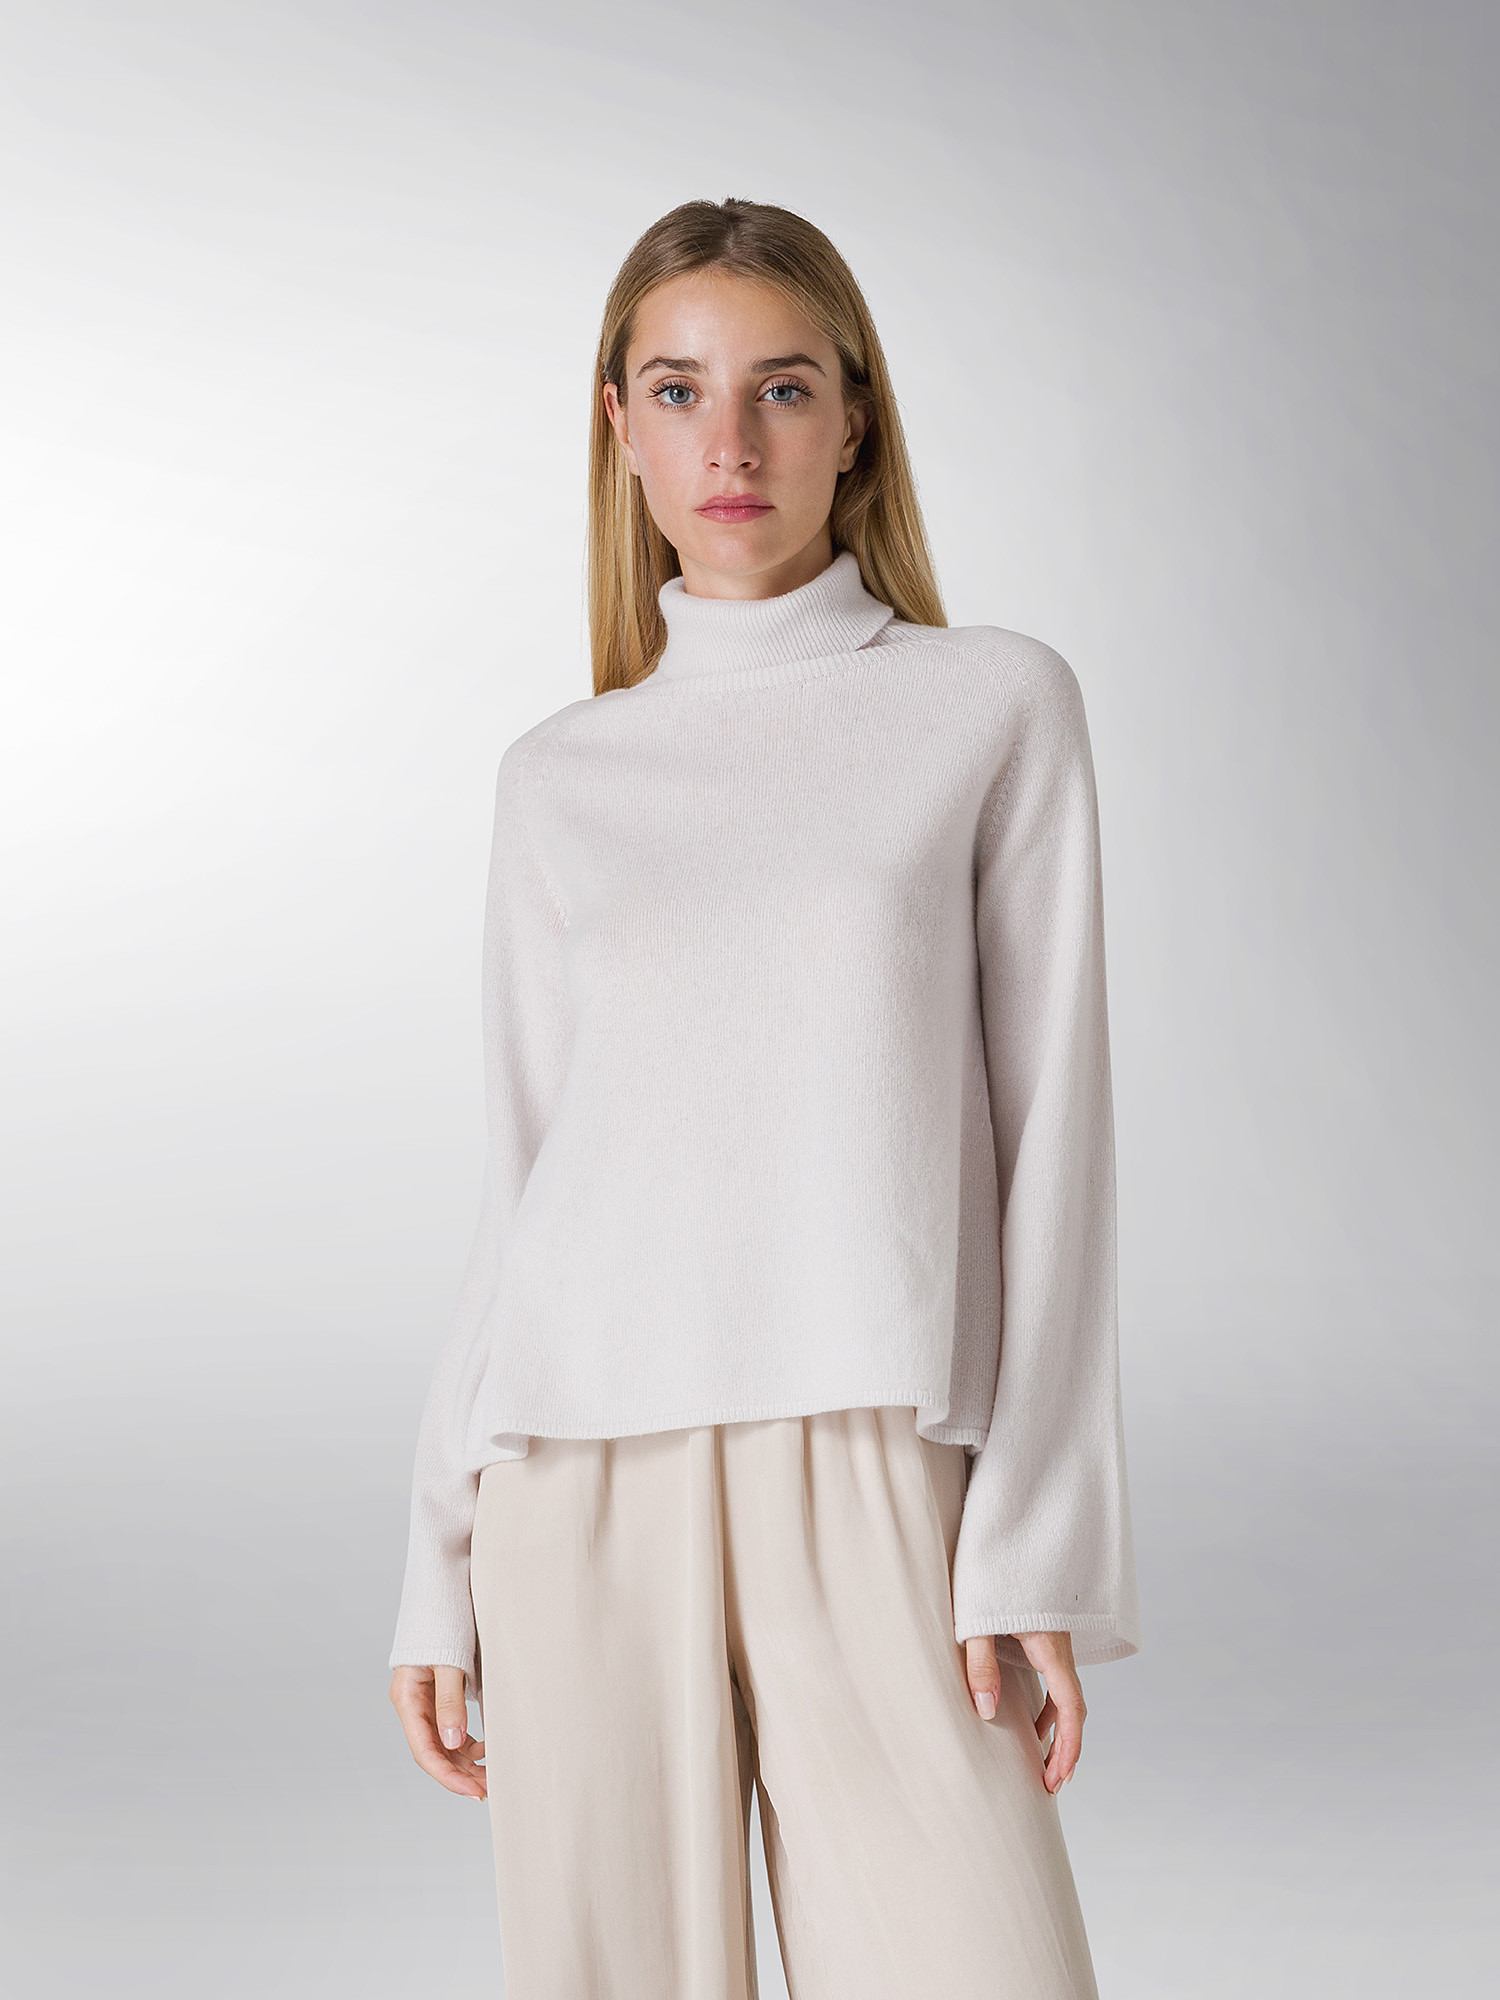 Coin Cashmere - Turtleneck in pure premium cashmere, White, large image number 1